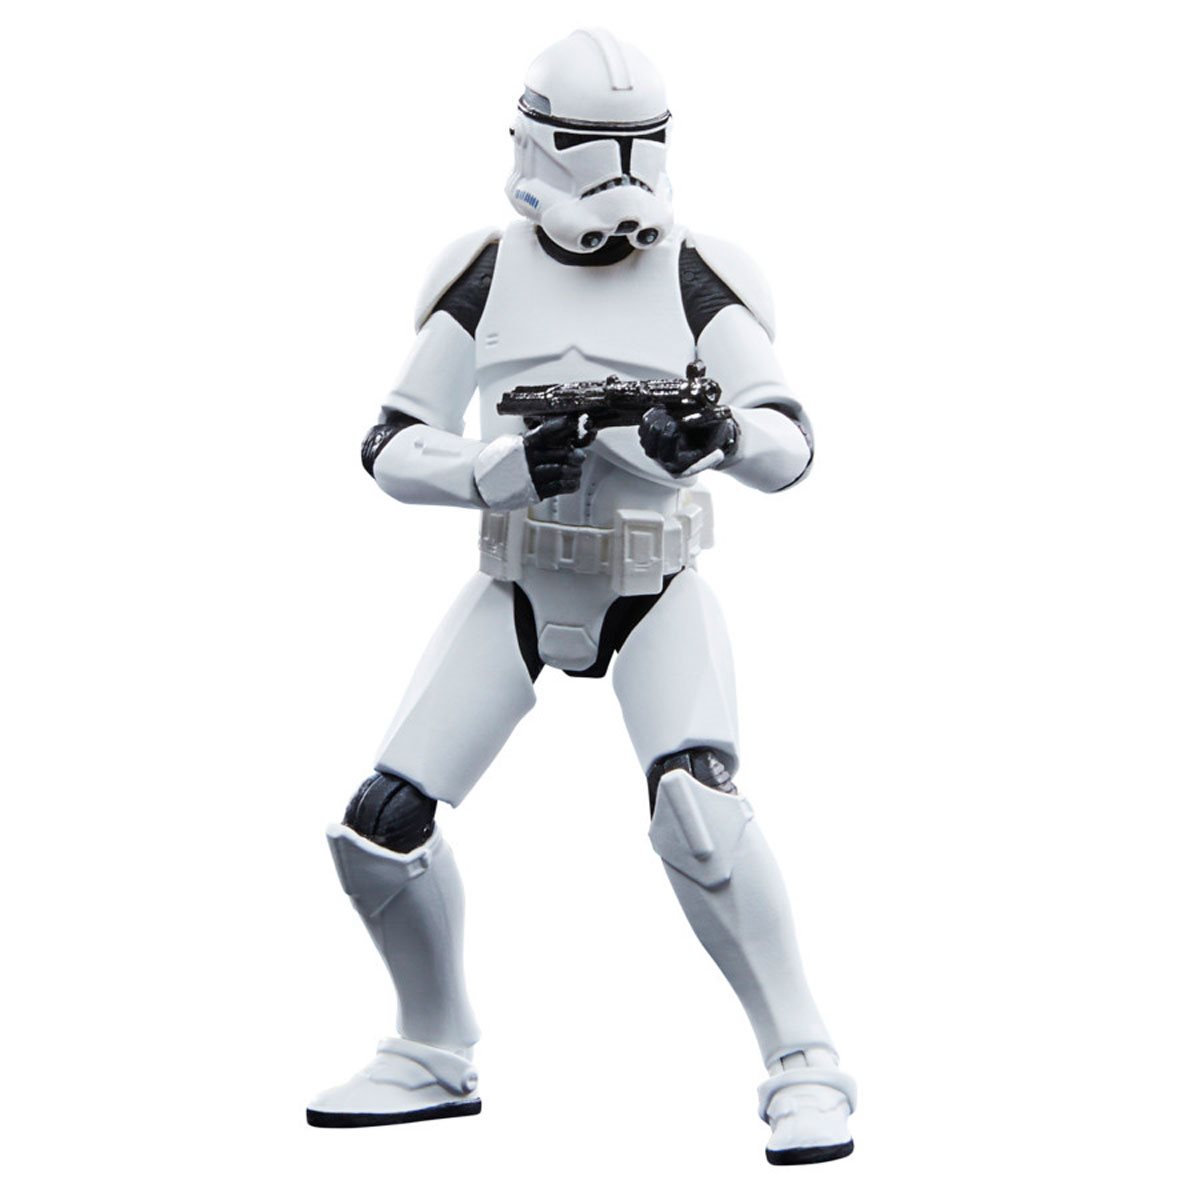 Star Wars (The Vintage Collection) - Hasbro - Clone Trooper - Revenge of  the Sith